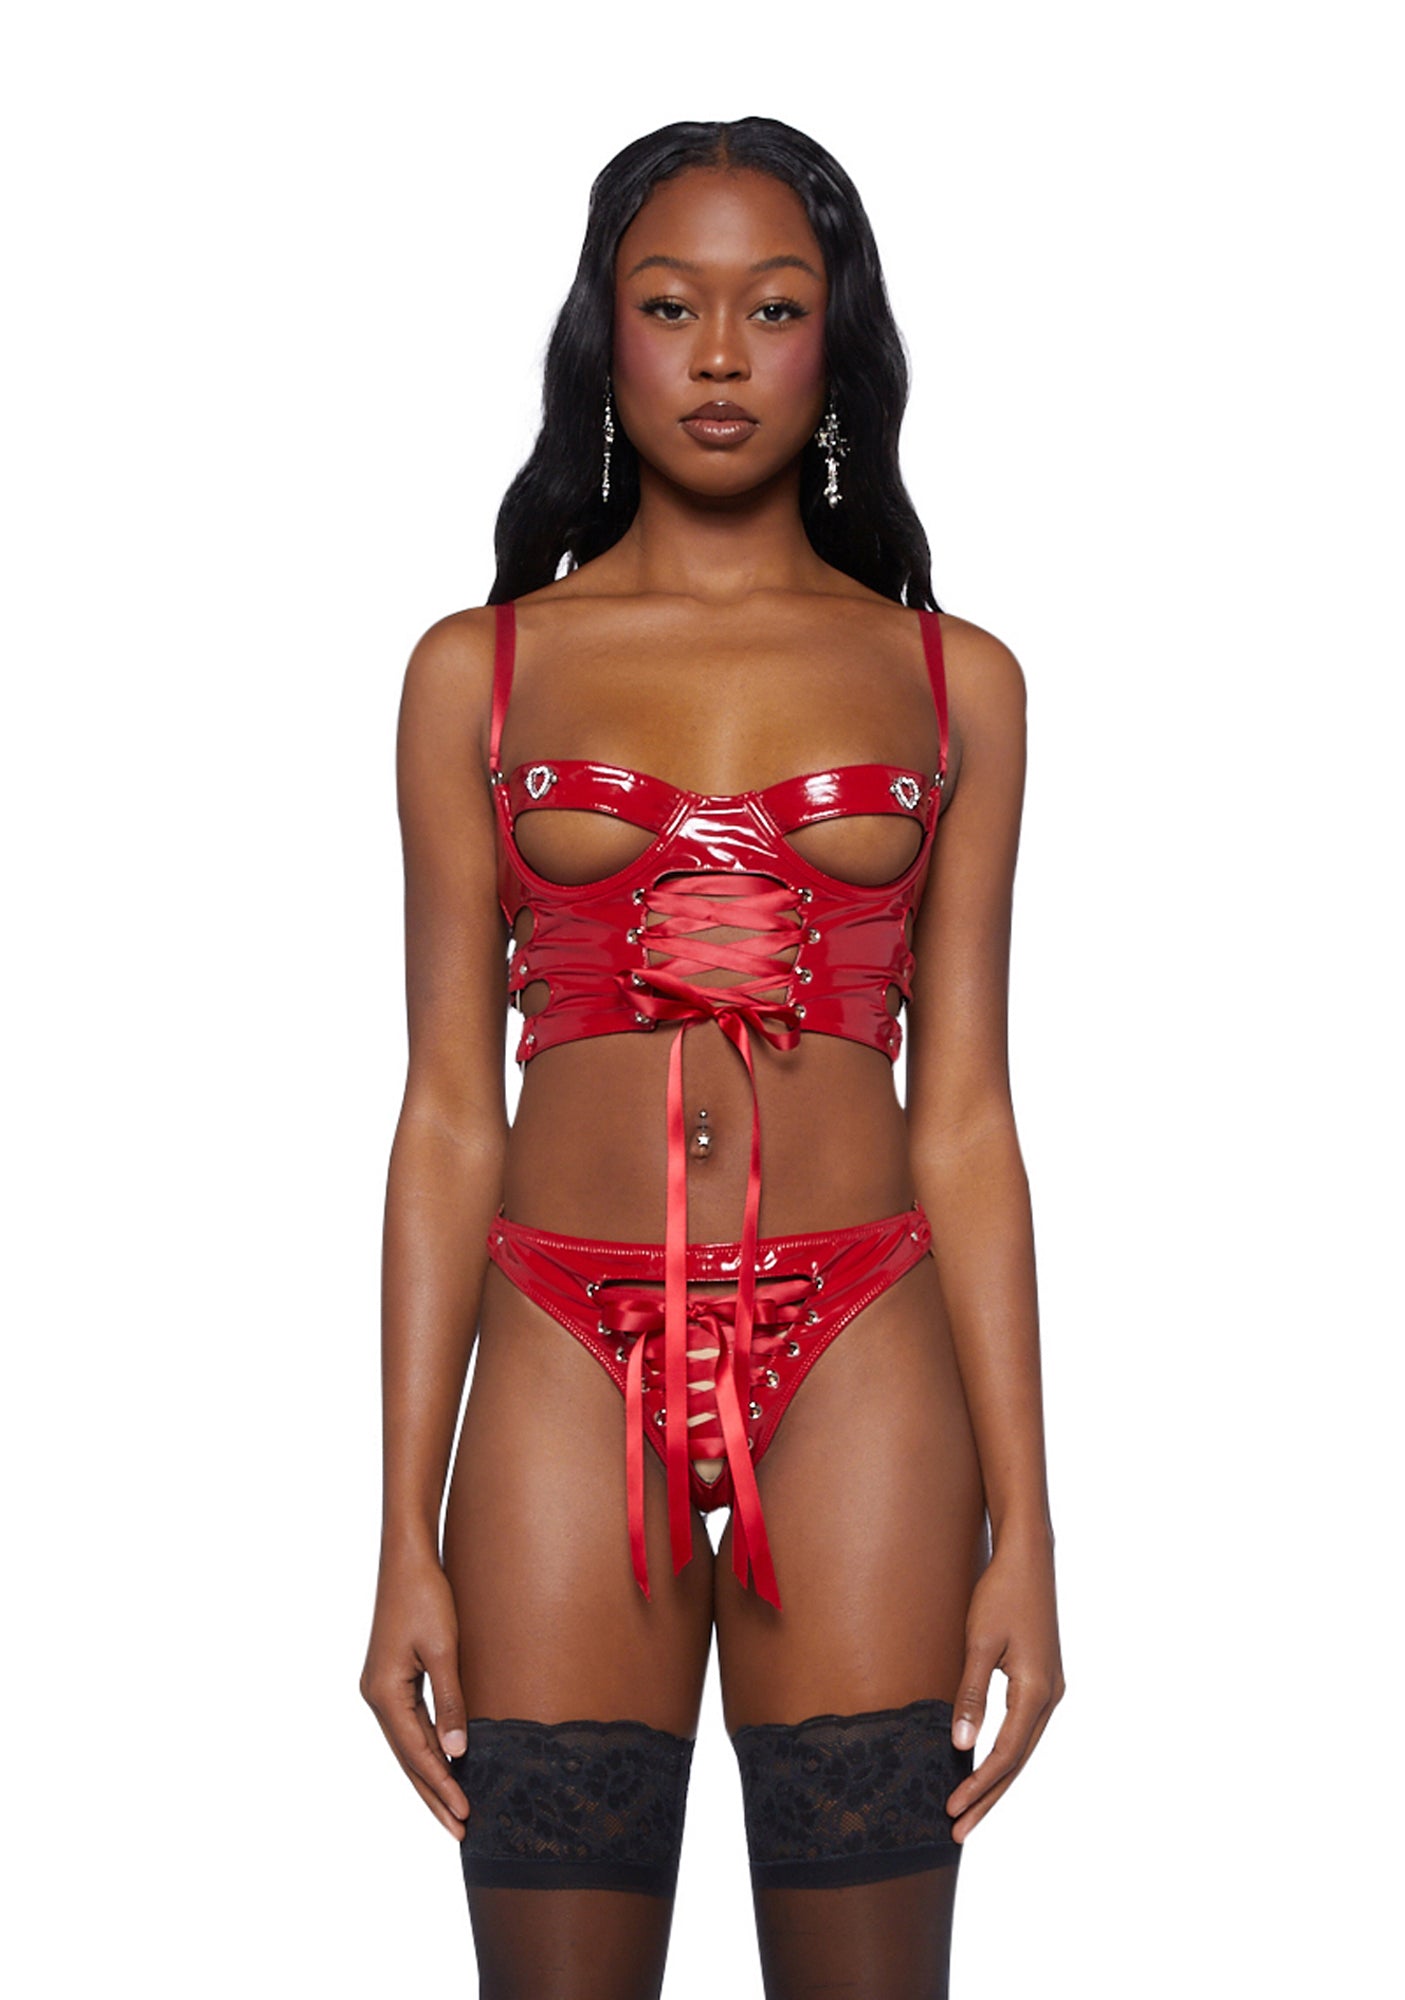 Sugar Thrillz PVC Vinyl Cut Out Bra And Panties Lingerie Sexy Set - Red